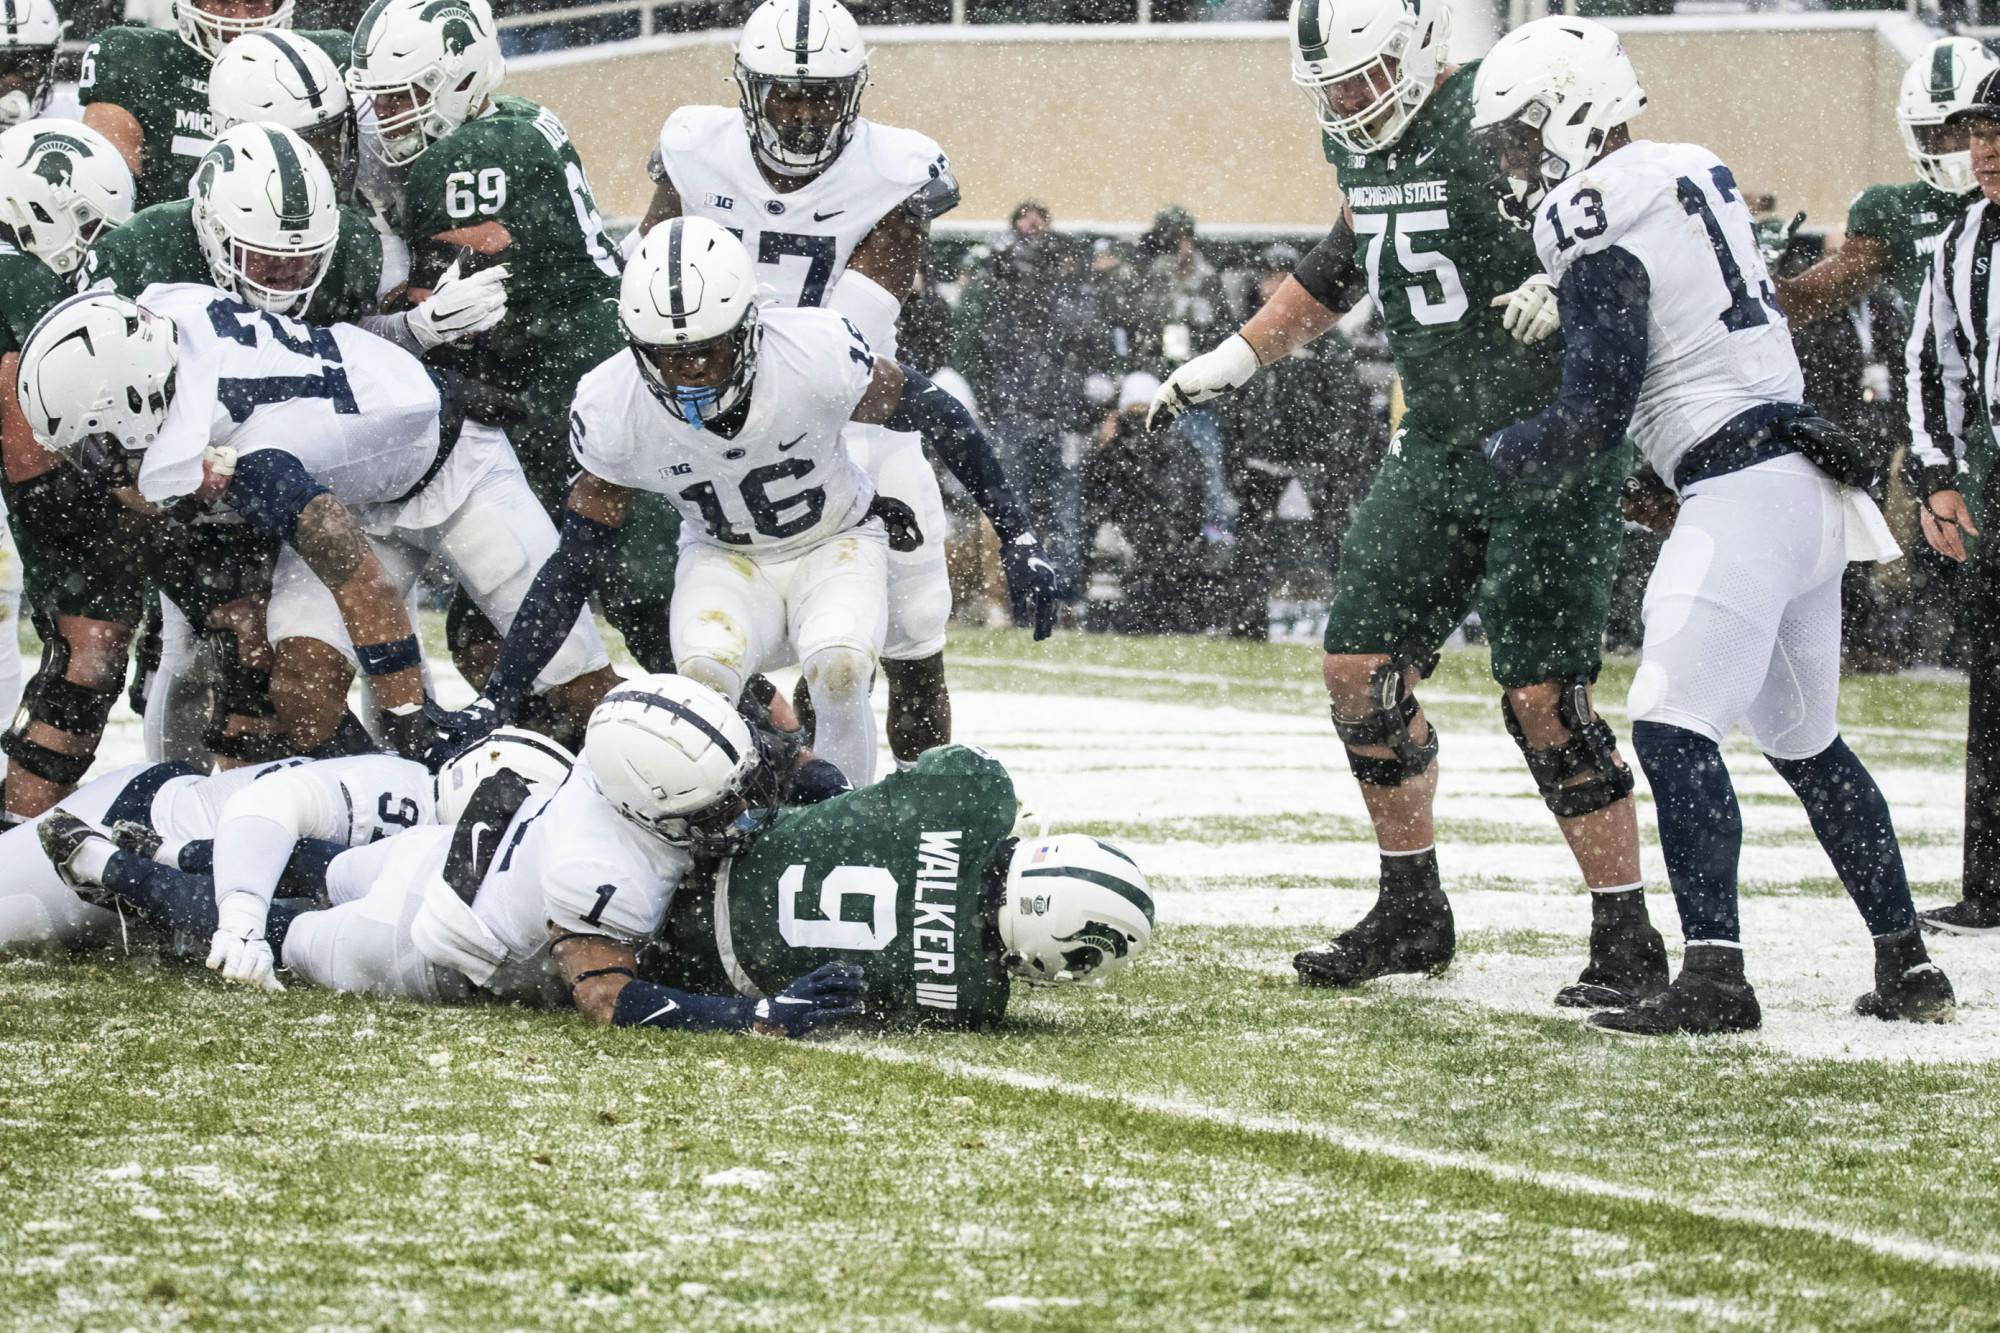 Walker (9) scores the first touchdown for the Spartans in Michigan State's match against the Penn State Nittany Lions at Spartan Stadium on Saturday, Nov. 27, 2021. 